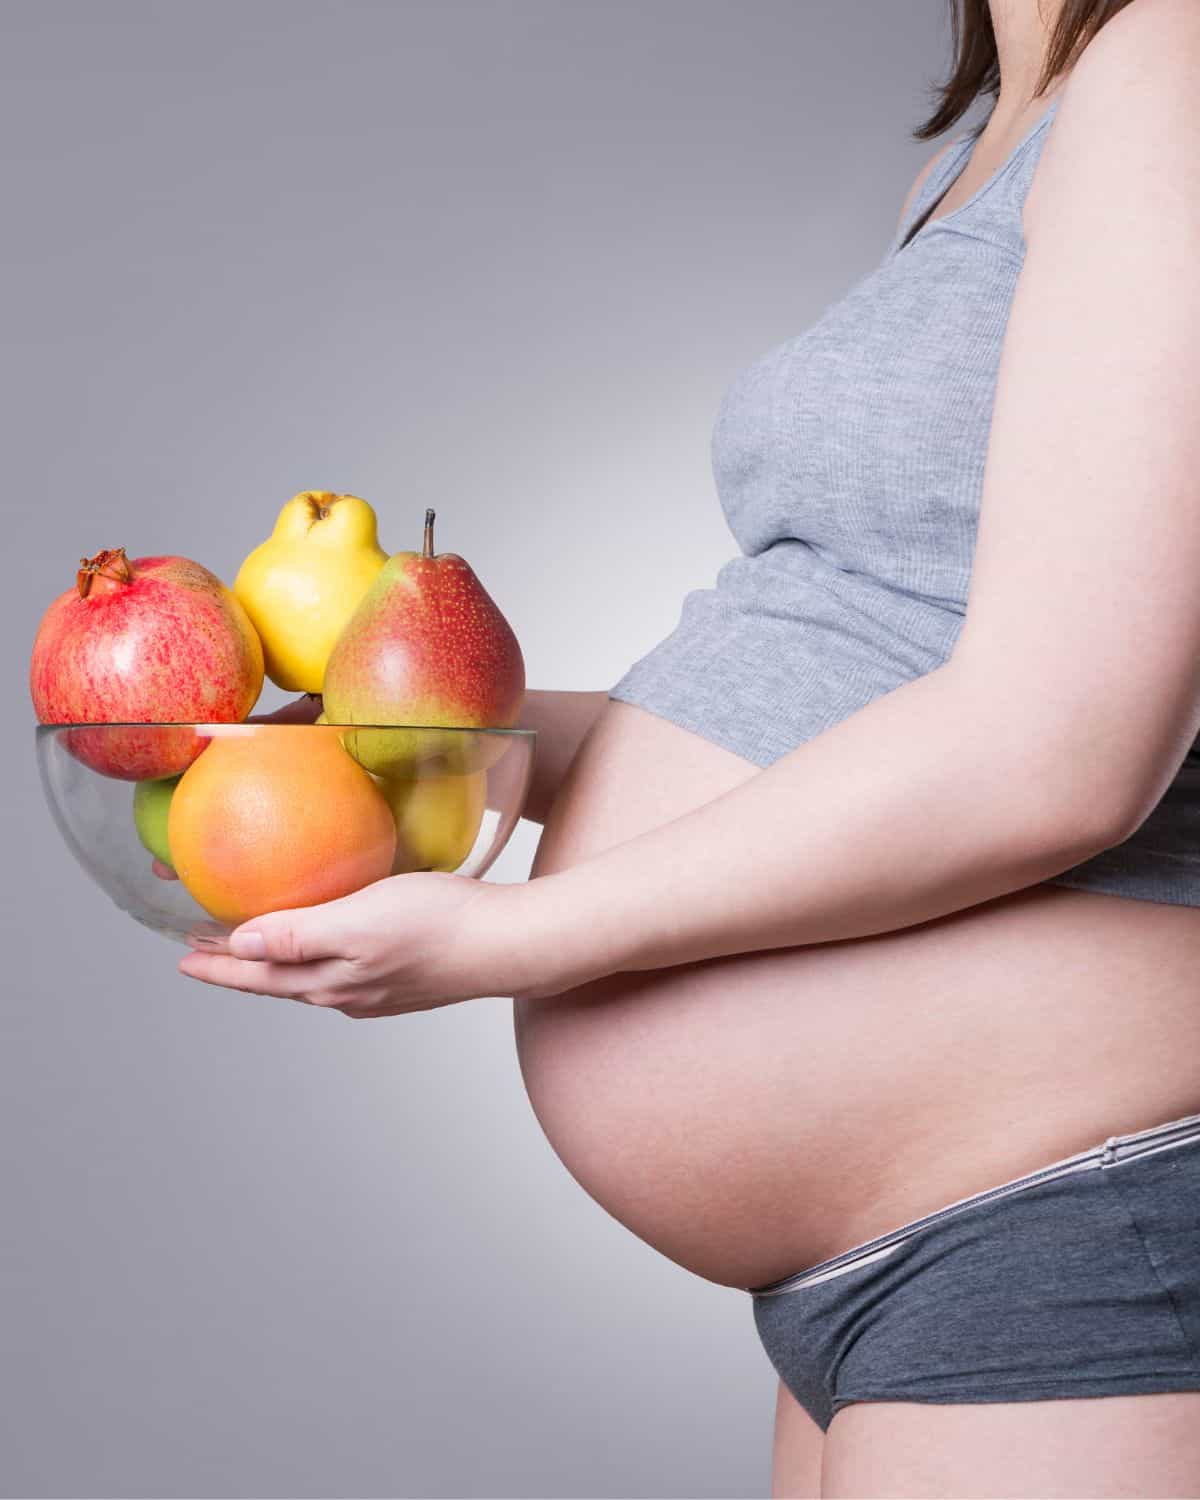 Image of a pregnant woman ensuring optimal nutrition with a plate full of plant-based food who is following a vegan pregnancy meal plan